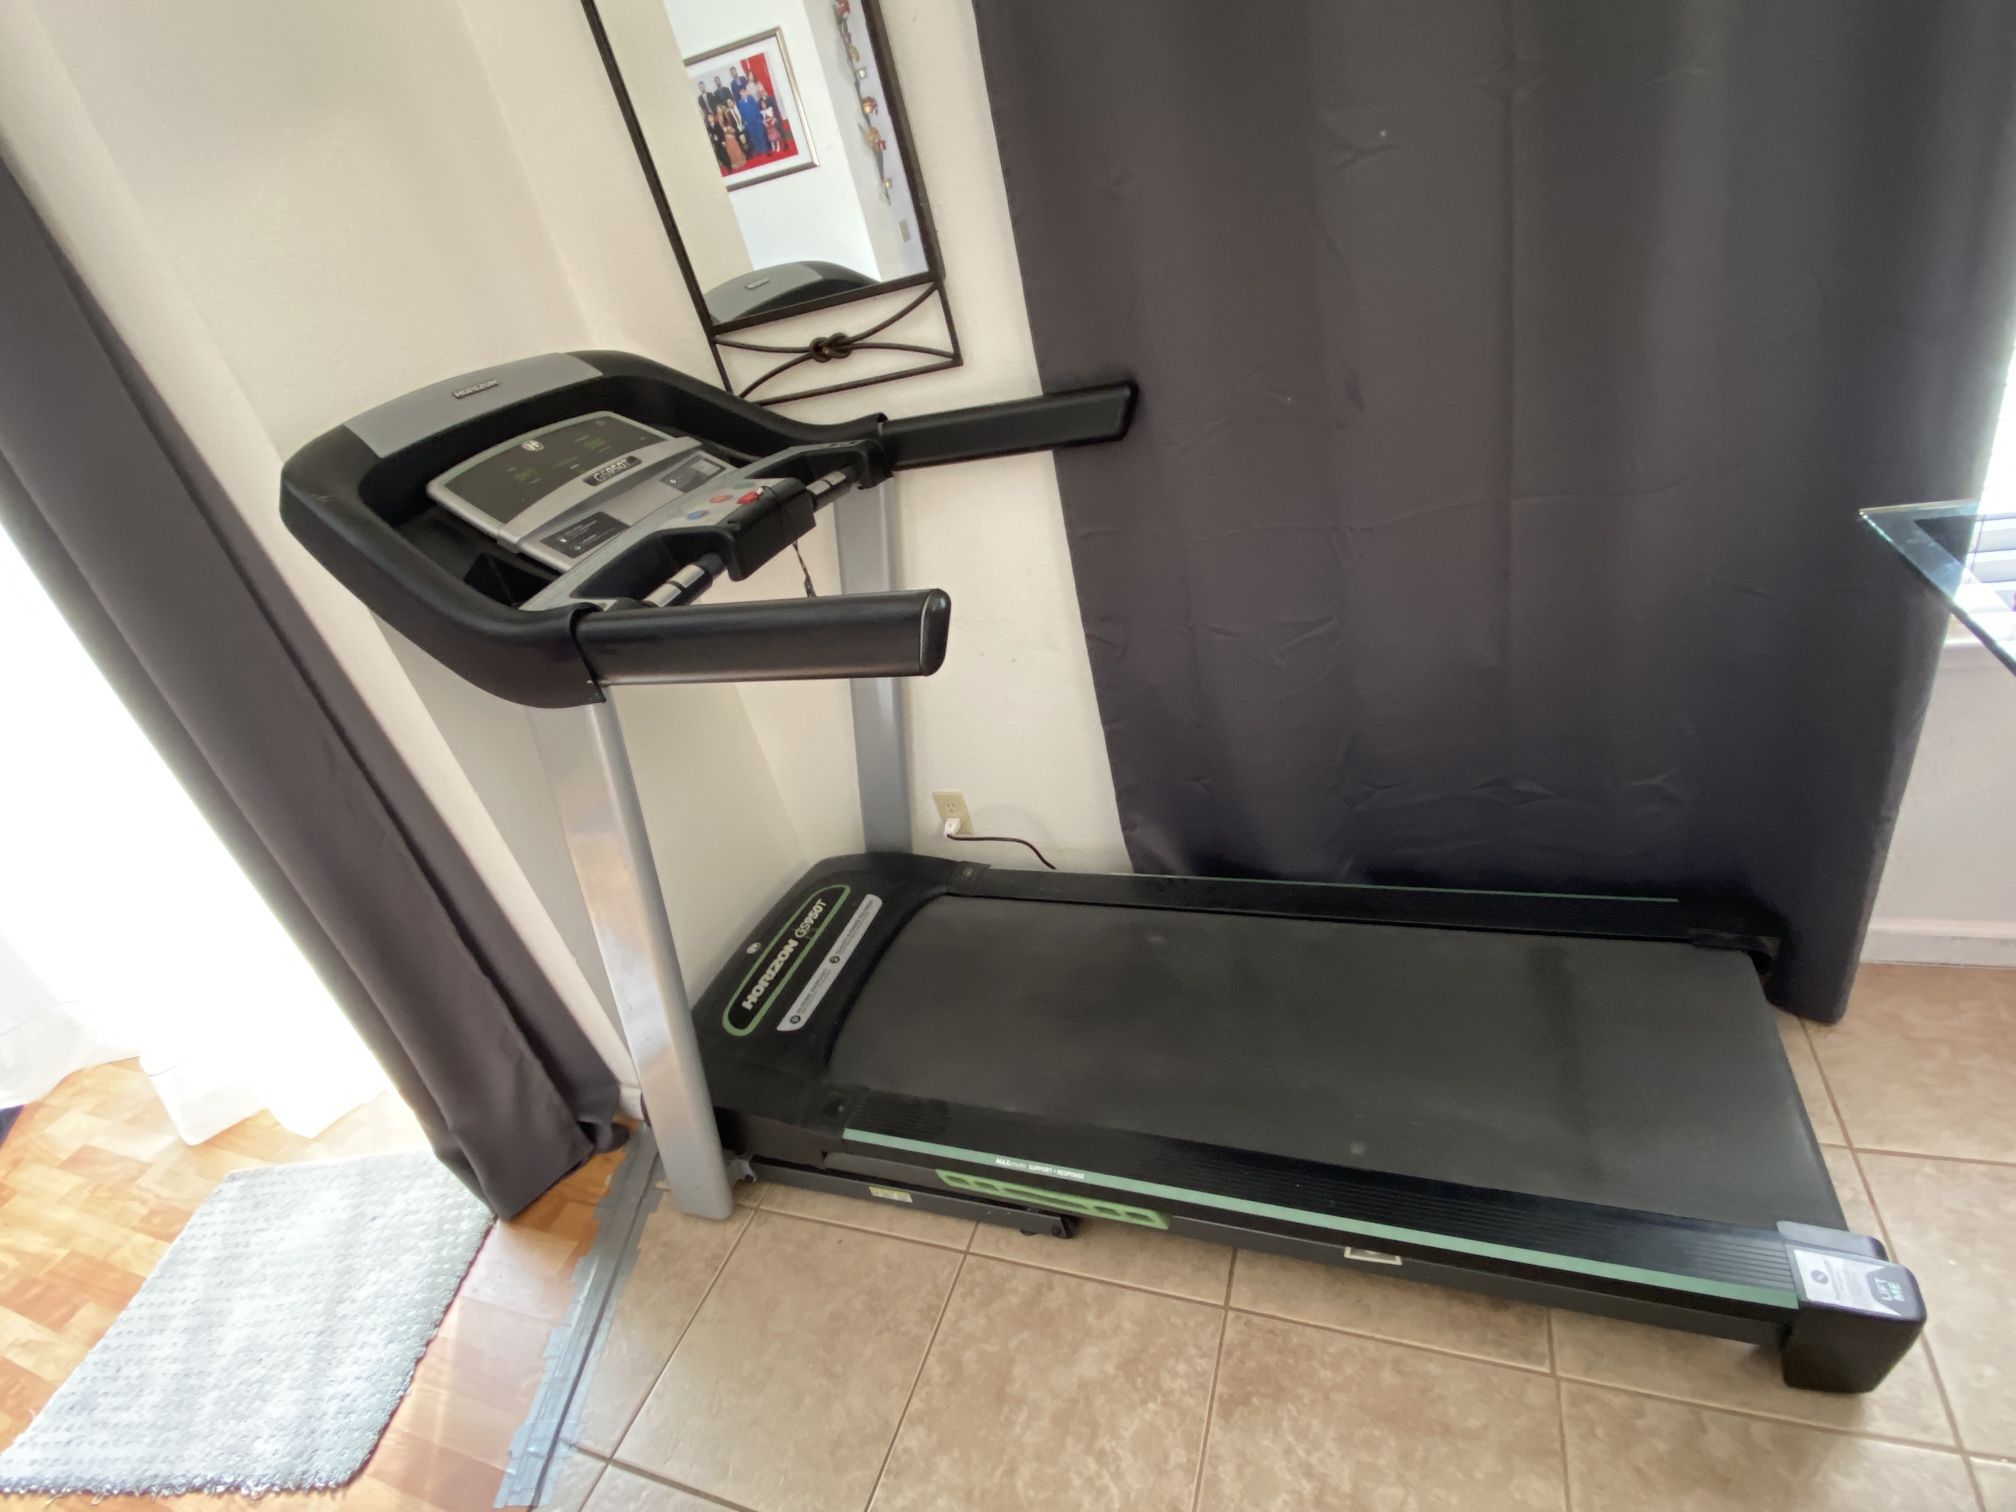 Horizon GS950T Treadmill for sale.  Price Reduced!